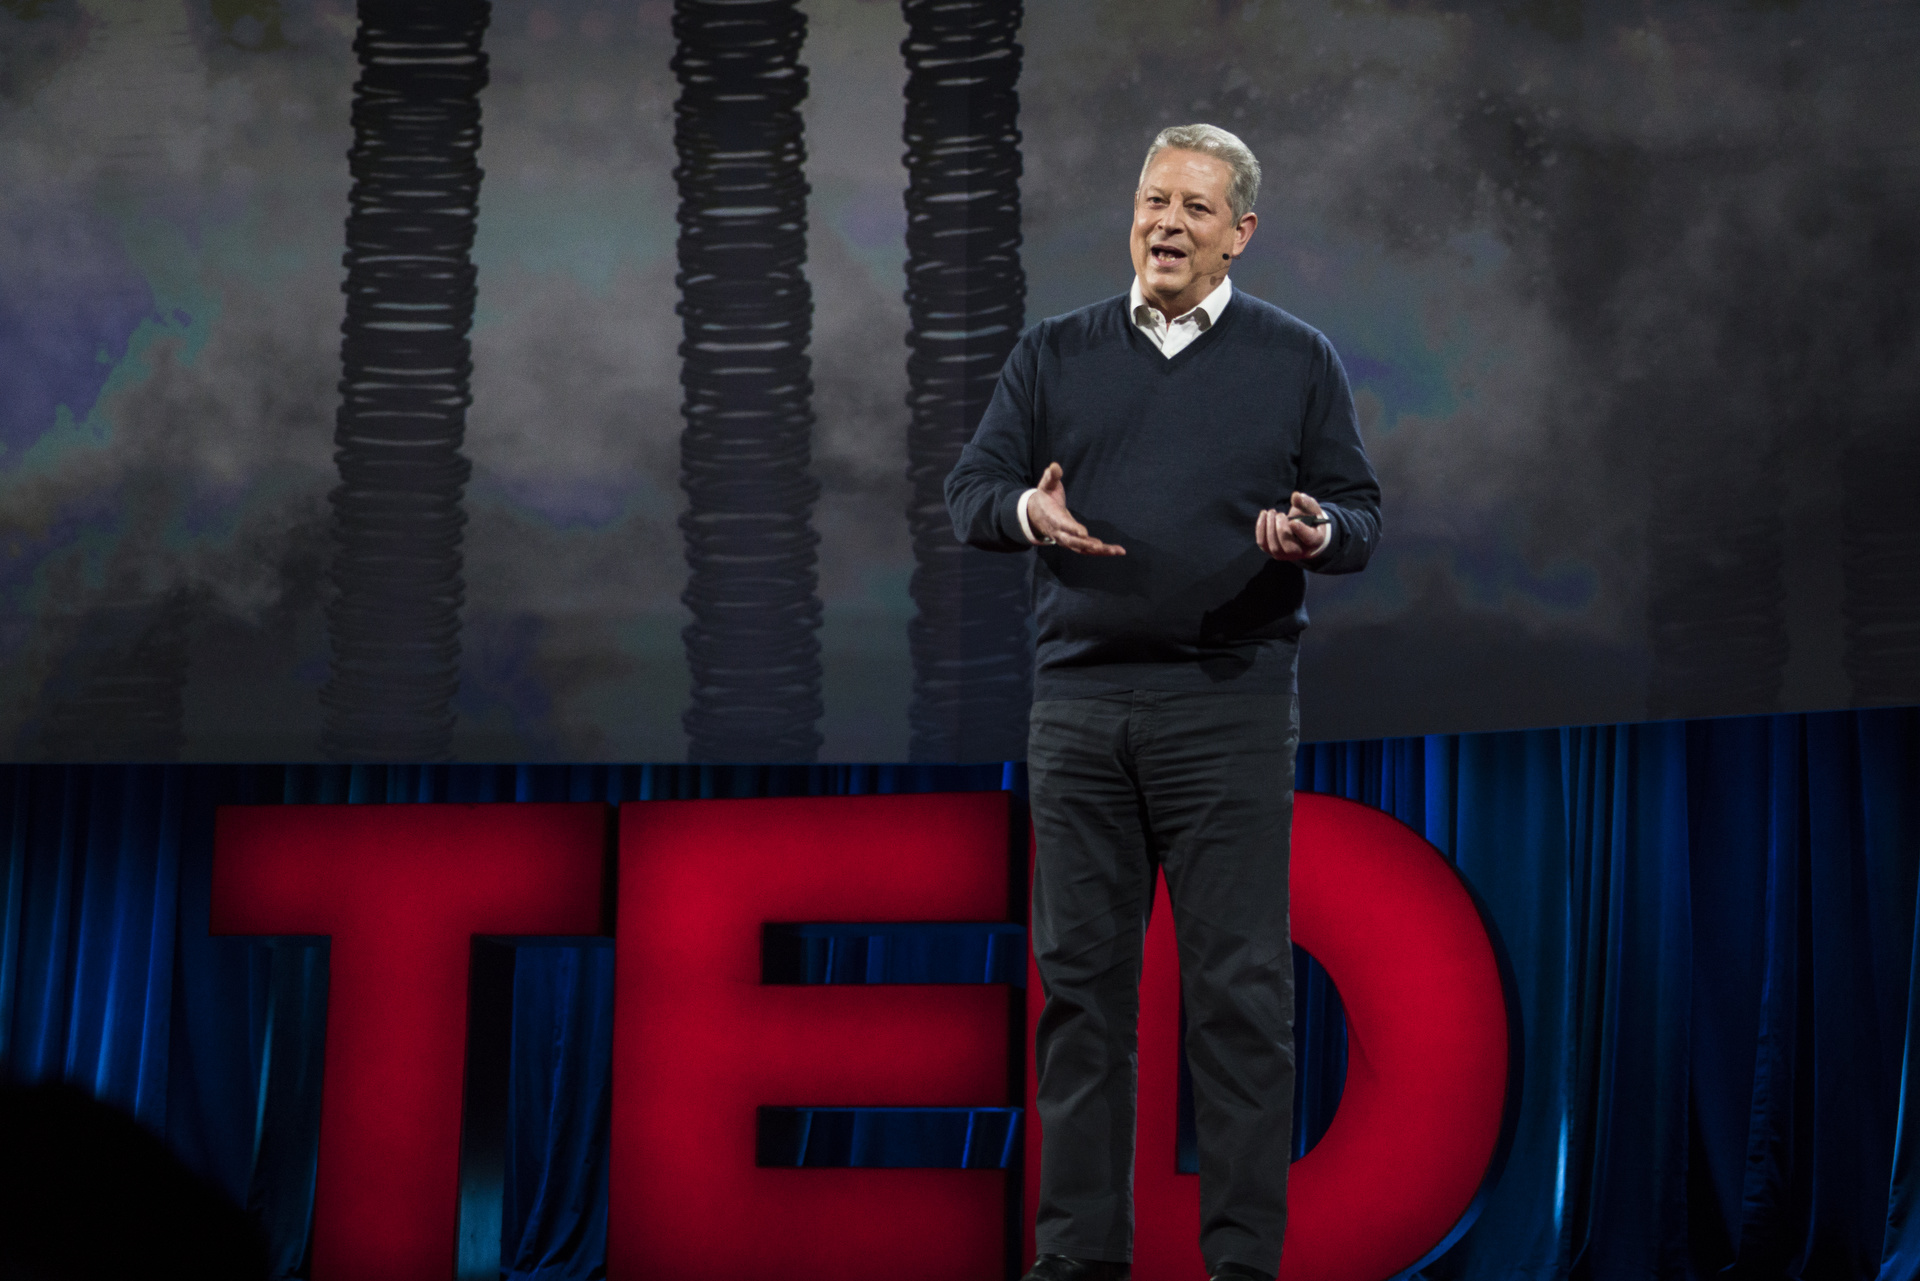 Al Gore speaks at TED2016 - Dream, February 15-19, 2016, Vancouver Convention Center, Vancouver, Canada. Photo: Bret Hartman / TED